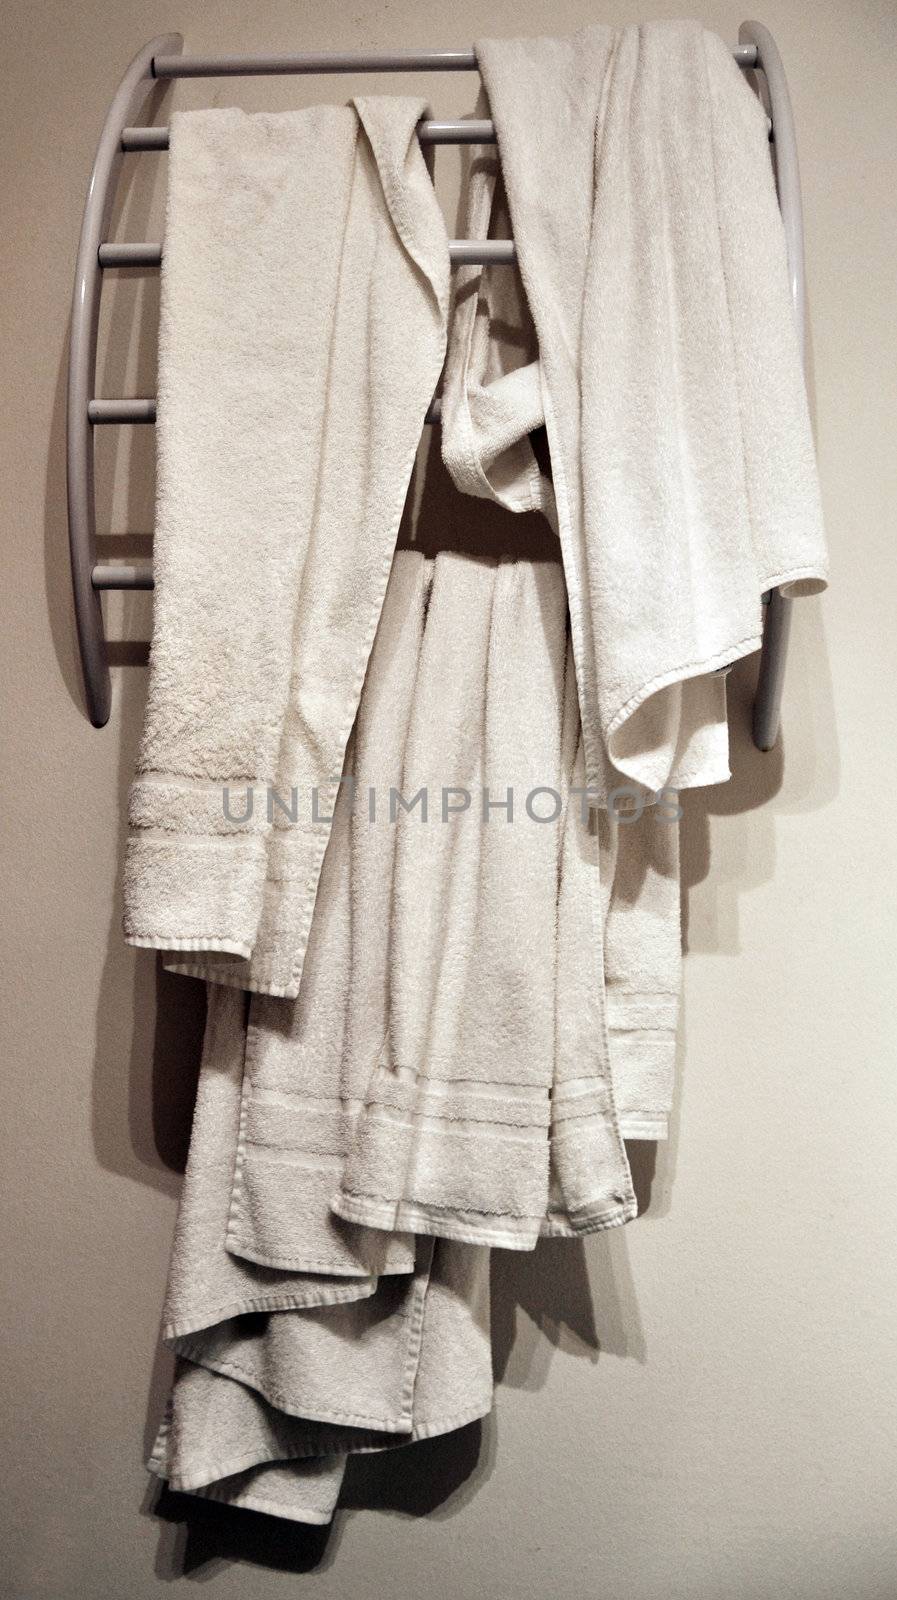 Several used hotel washroom towels on modern white rack in front of white wall